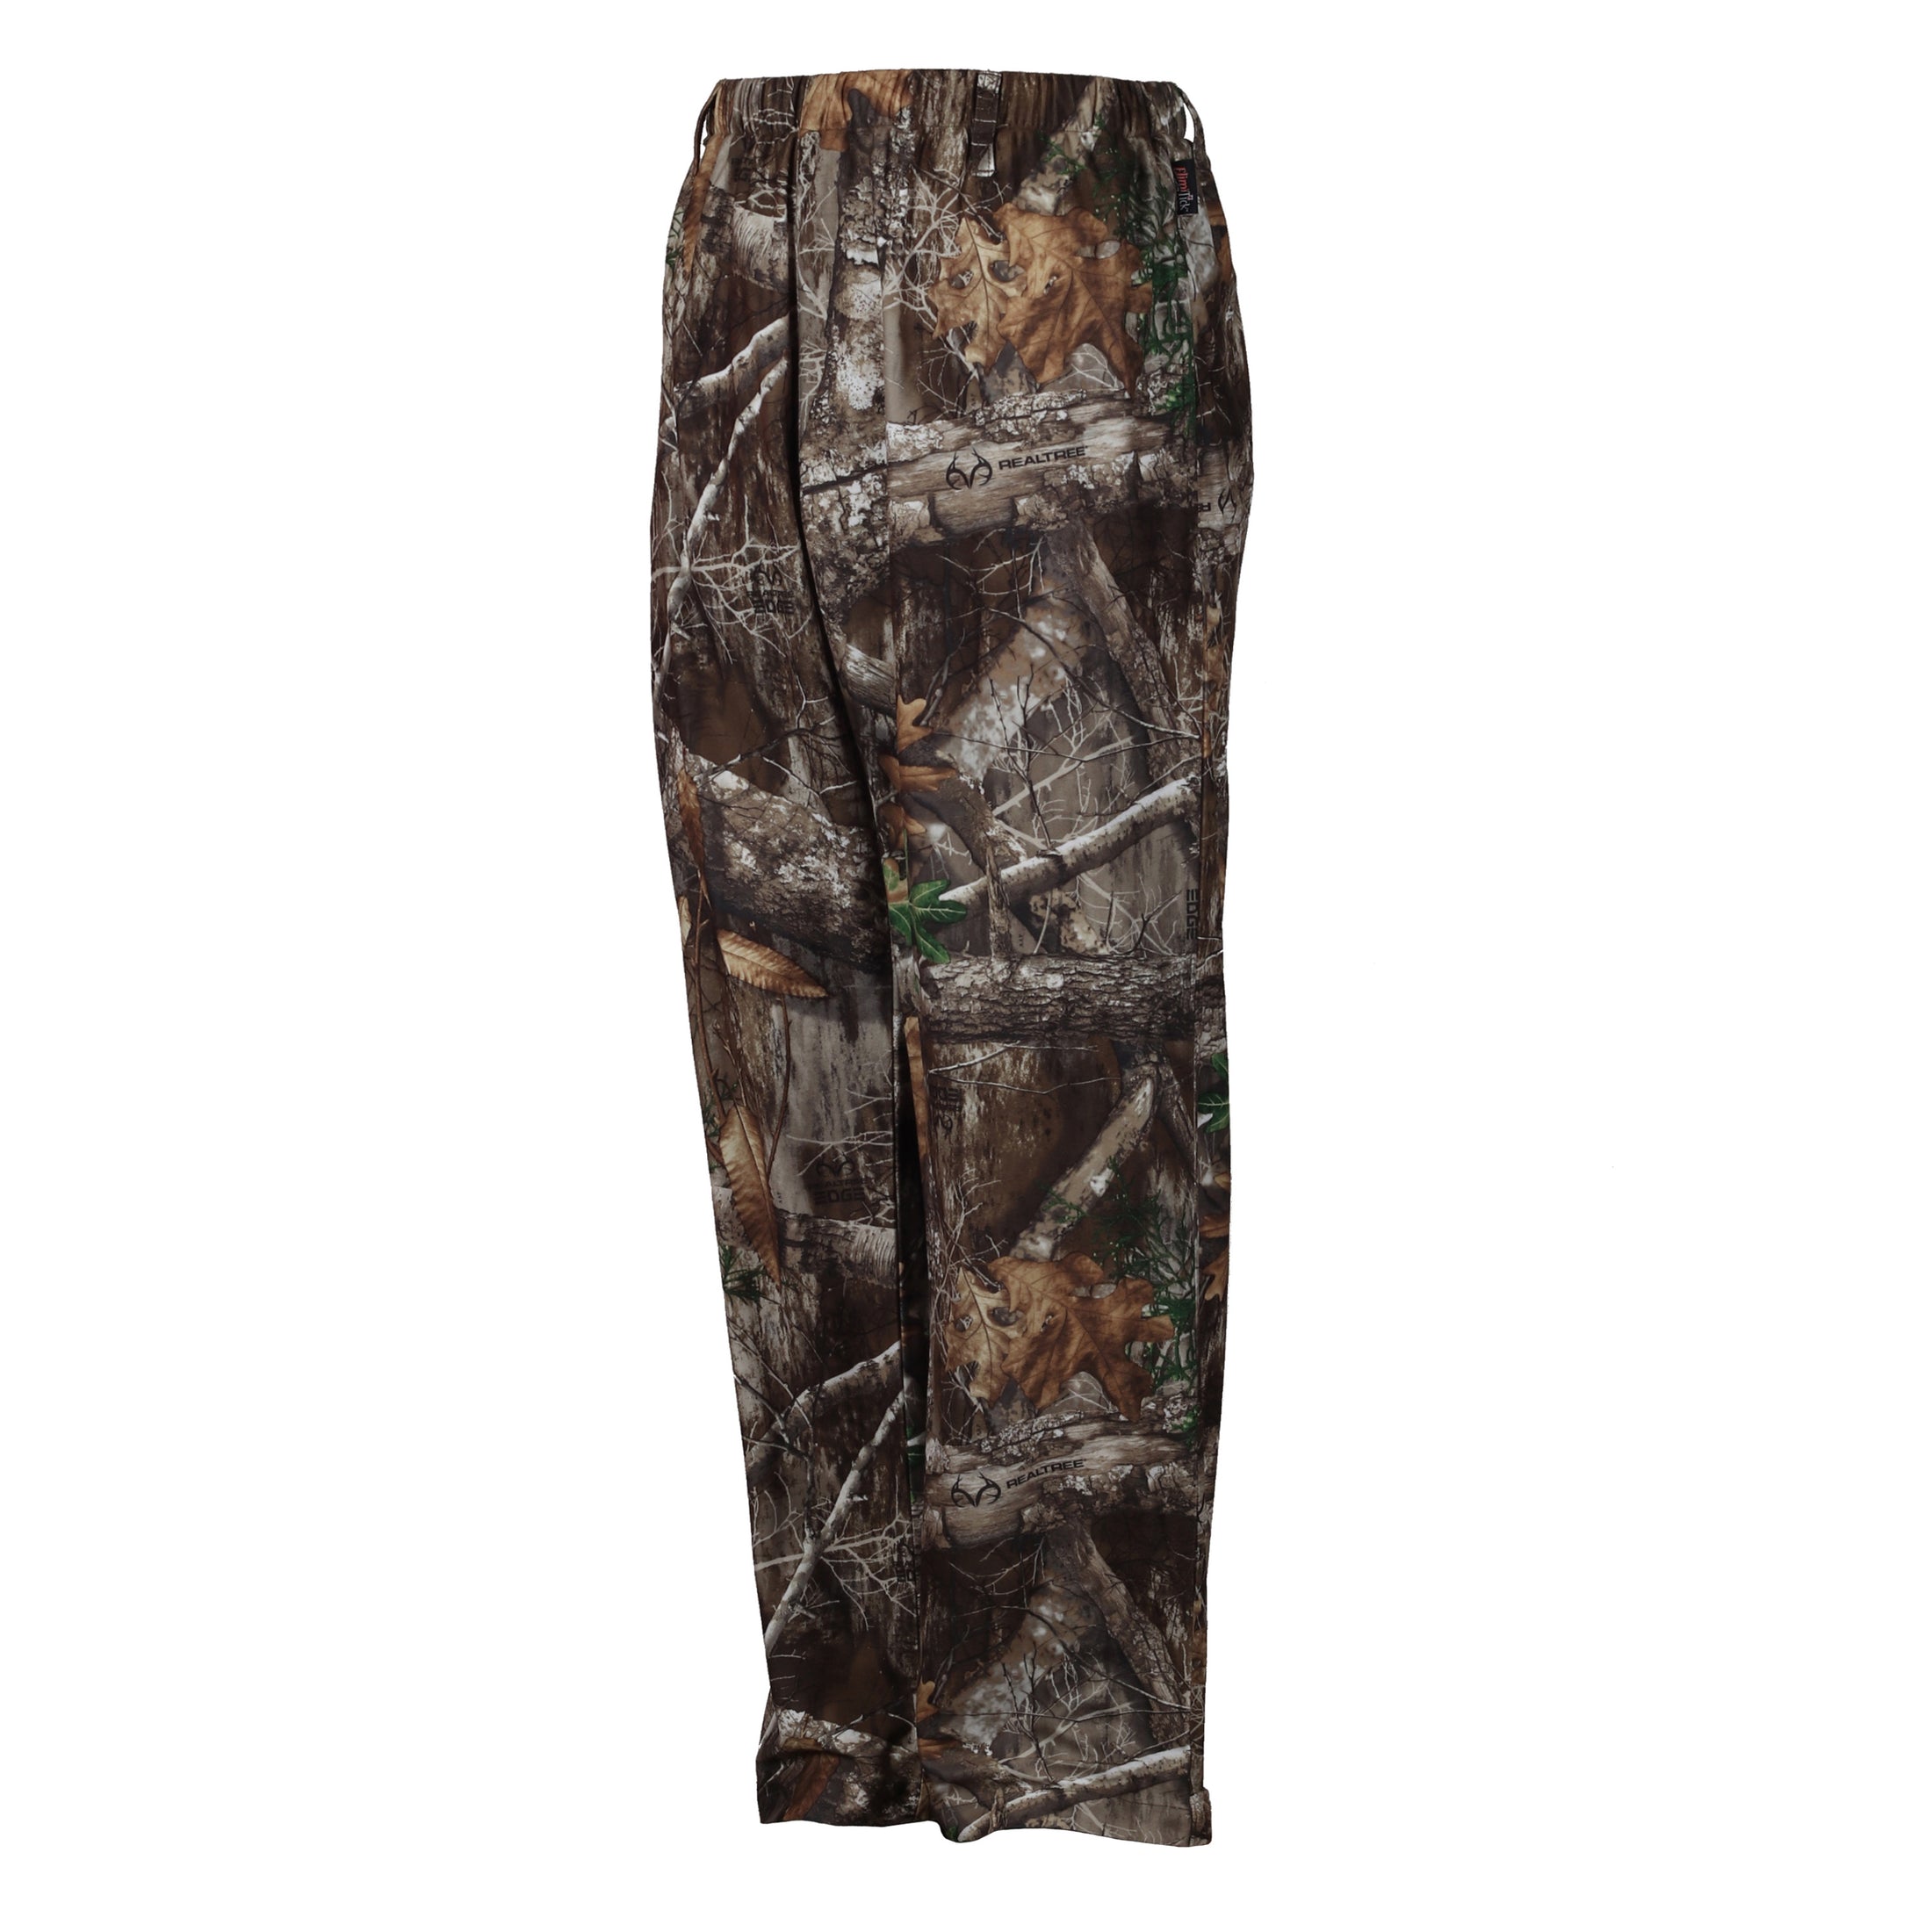 gamehdie ElimiTick Insect Repellent Cover Up Pant front (realtree edge)